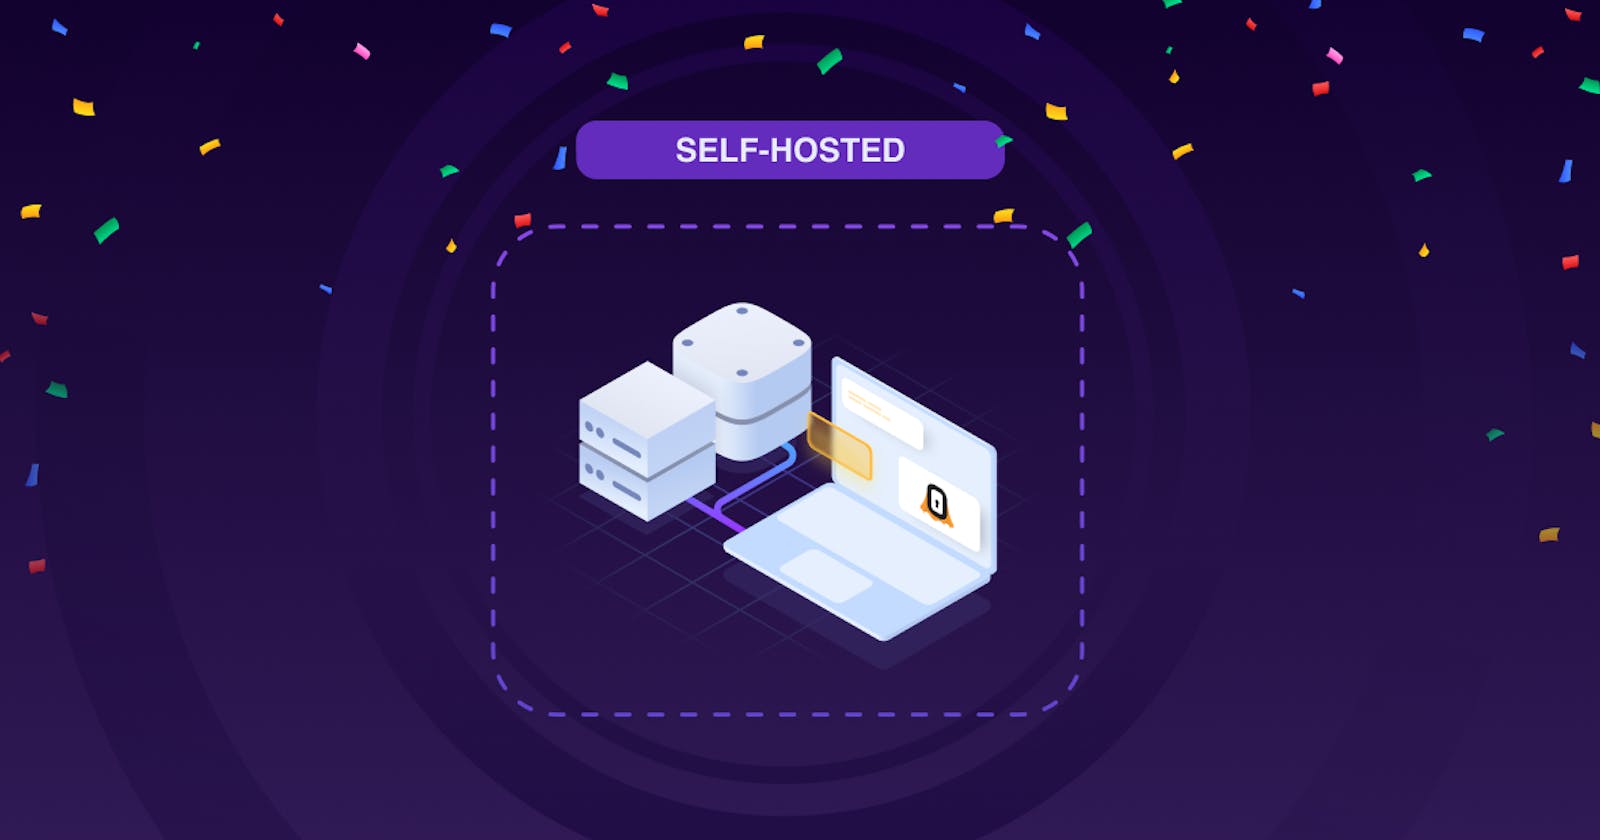 So You Want to Self-Host? A Beginner's Guide from a Frazzled DevOps Guy 👨‍💻